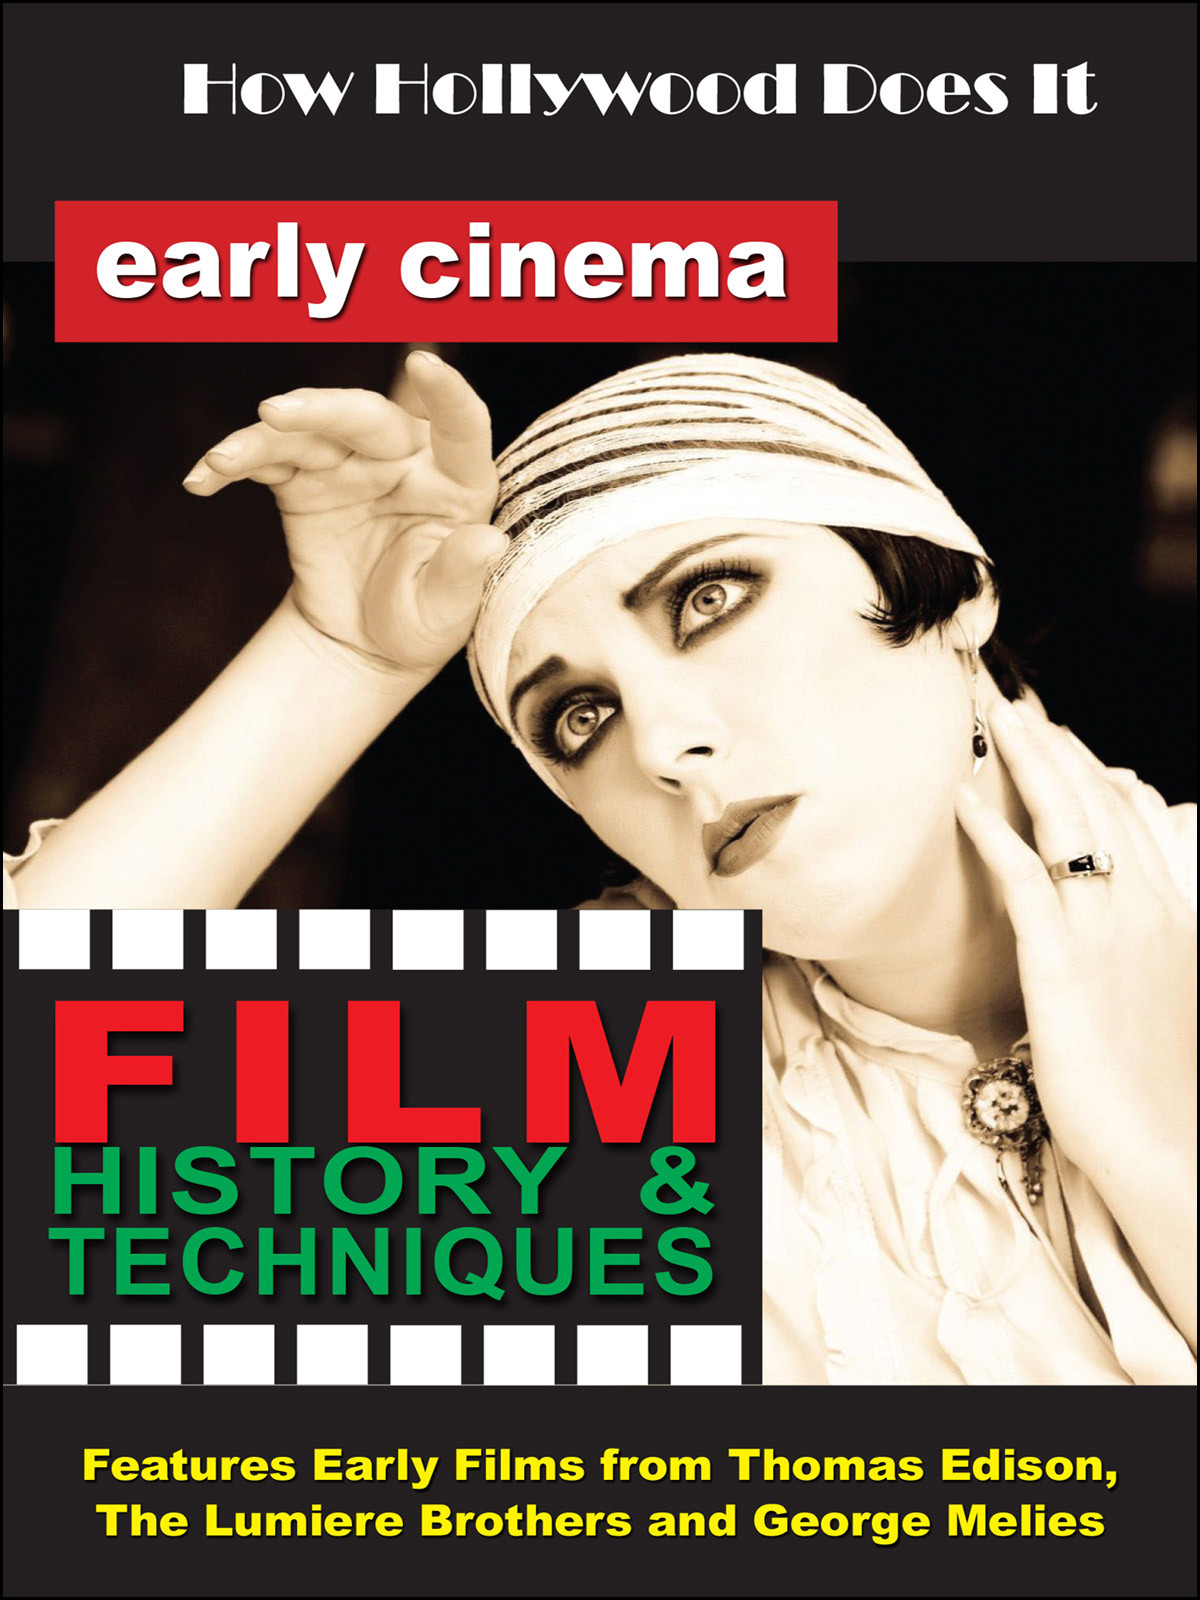 F2710 - How Hollywood Does It - Film History & Techniques of Early Cinema